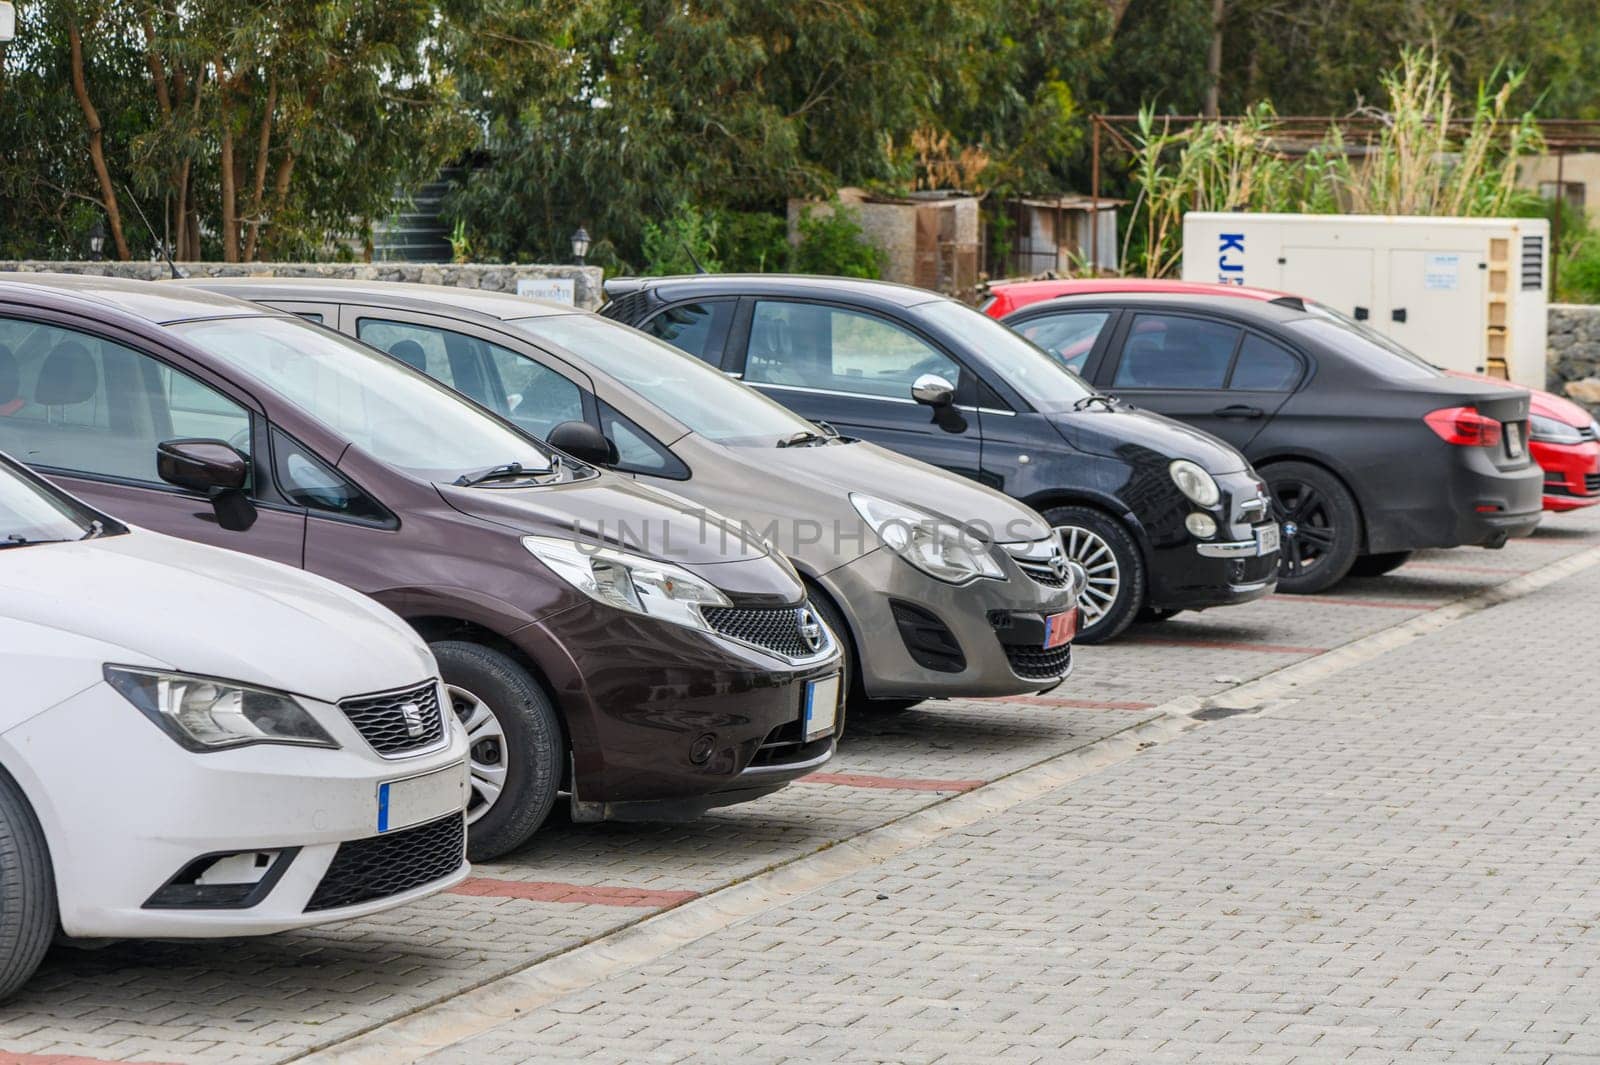 Cars parked in front of a modern residential complex in Cyprus by Mixa74